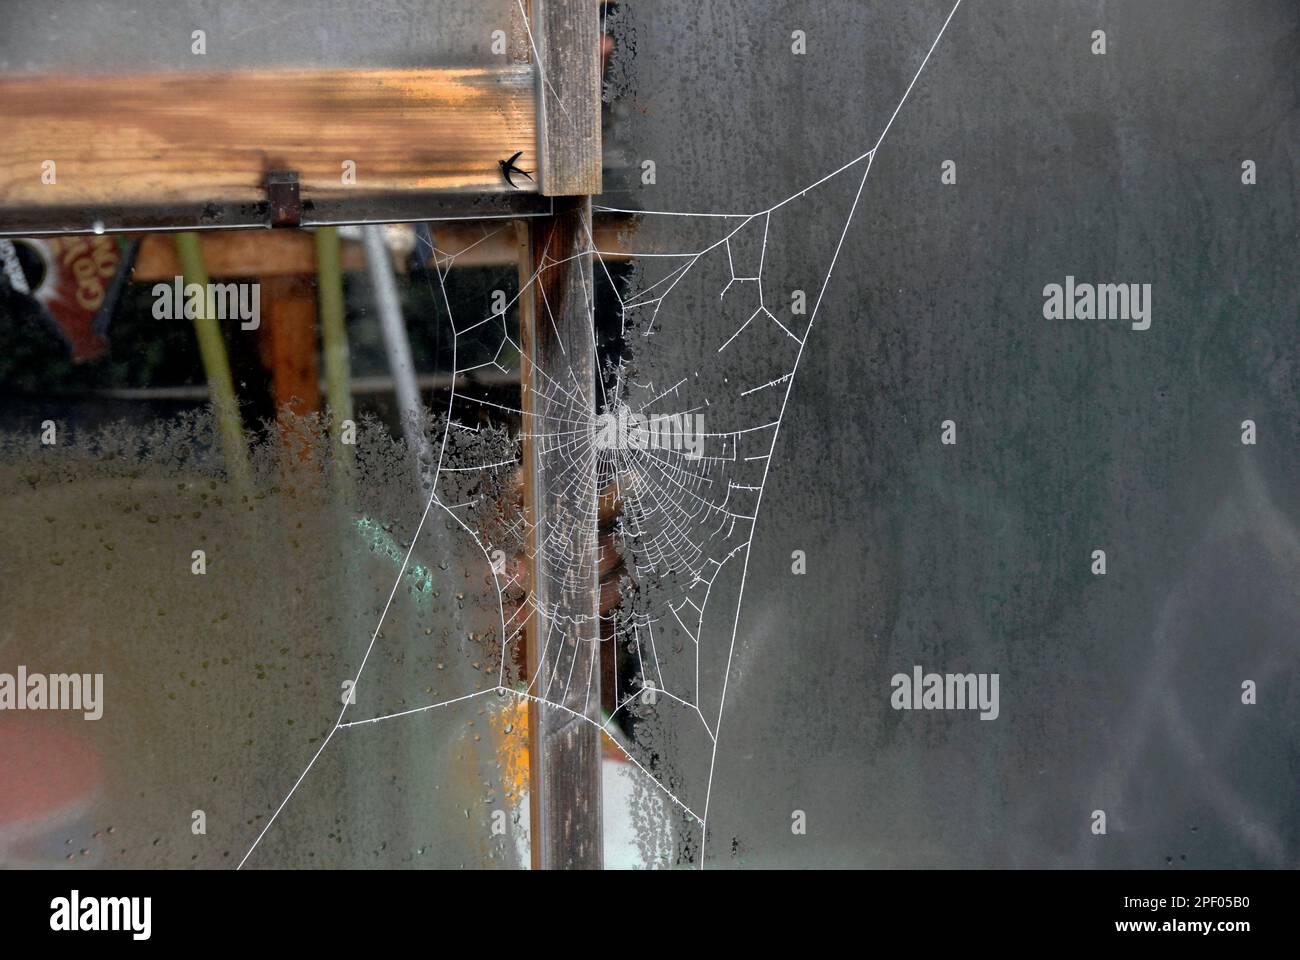 Spider's web on outside of greenhouse in frosty weather conditions Stock Photo